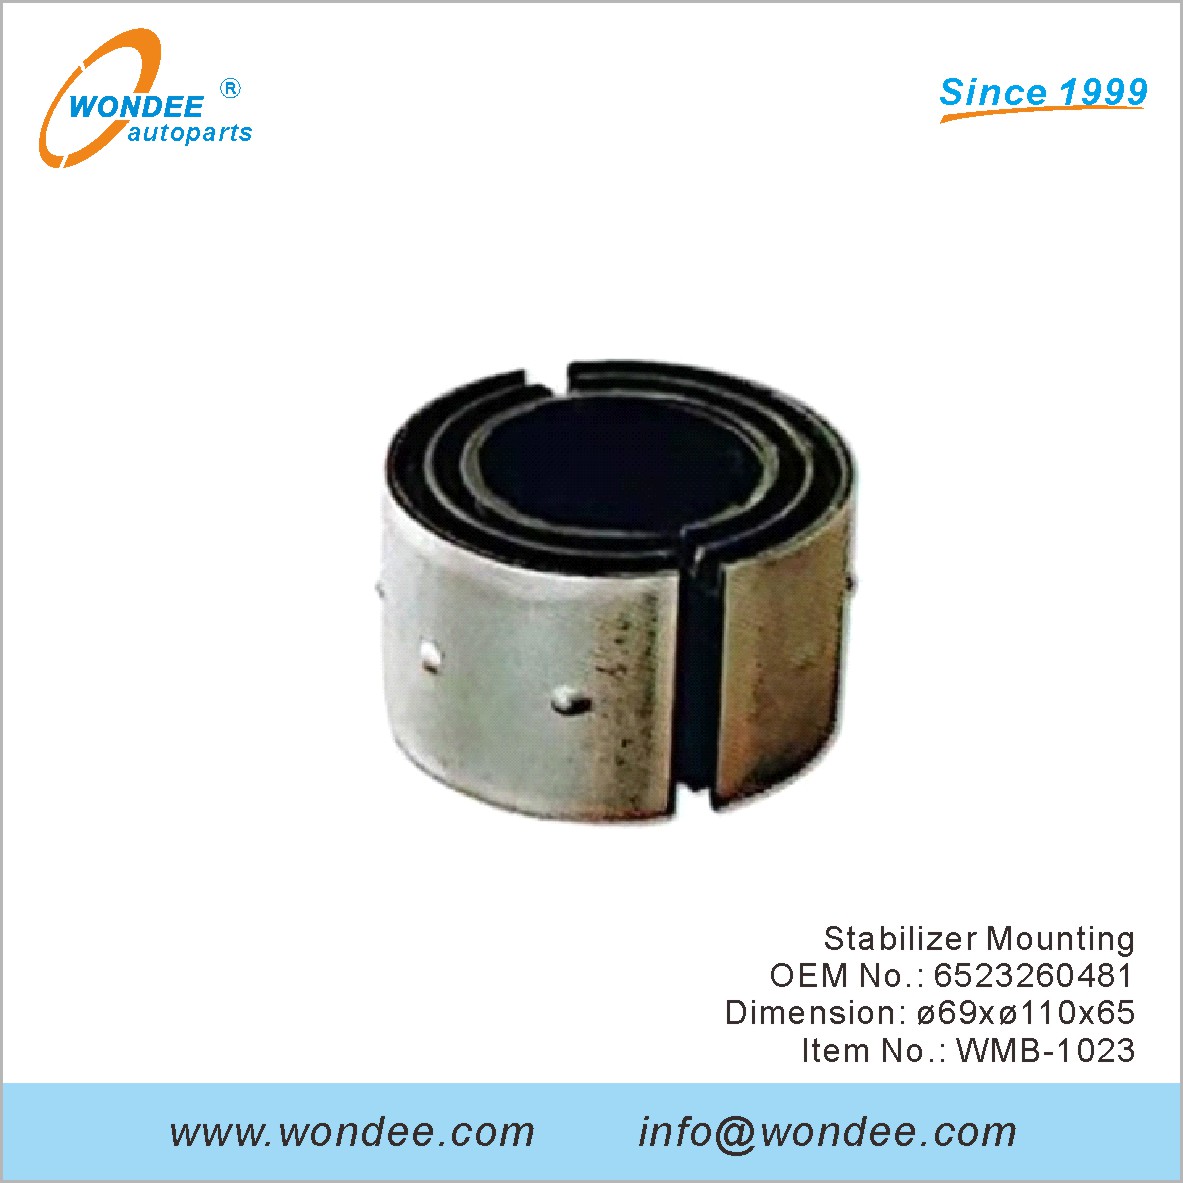 Stabilizer Mounting OEM 6523260481 for Benz from WONDEE